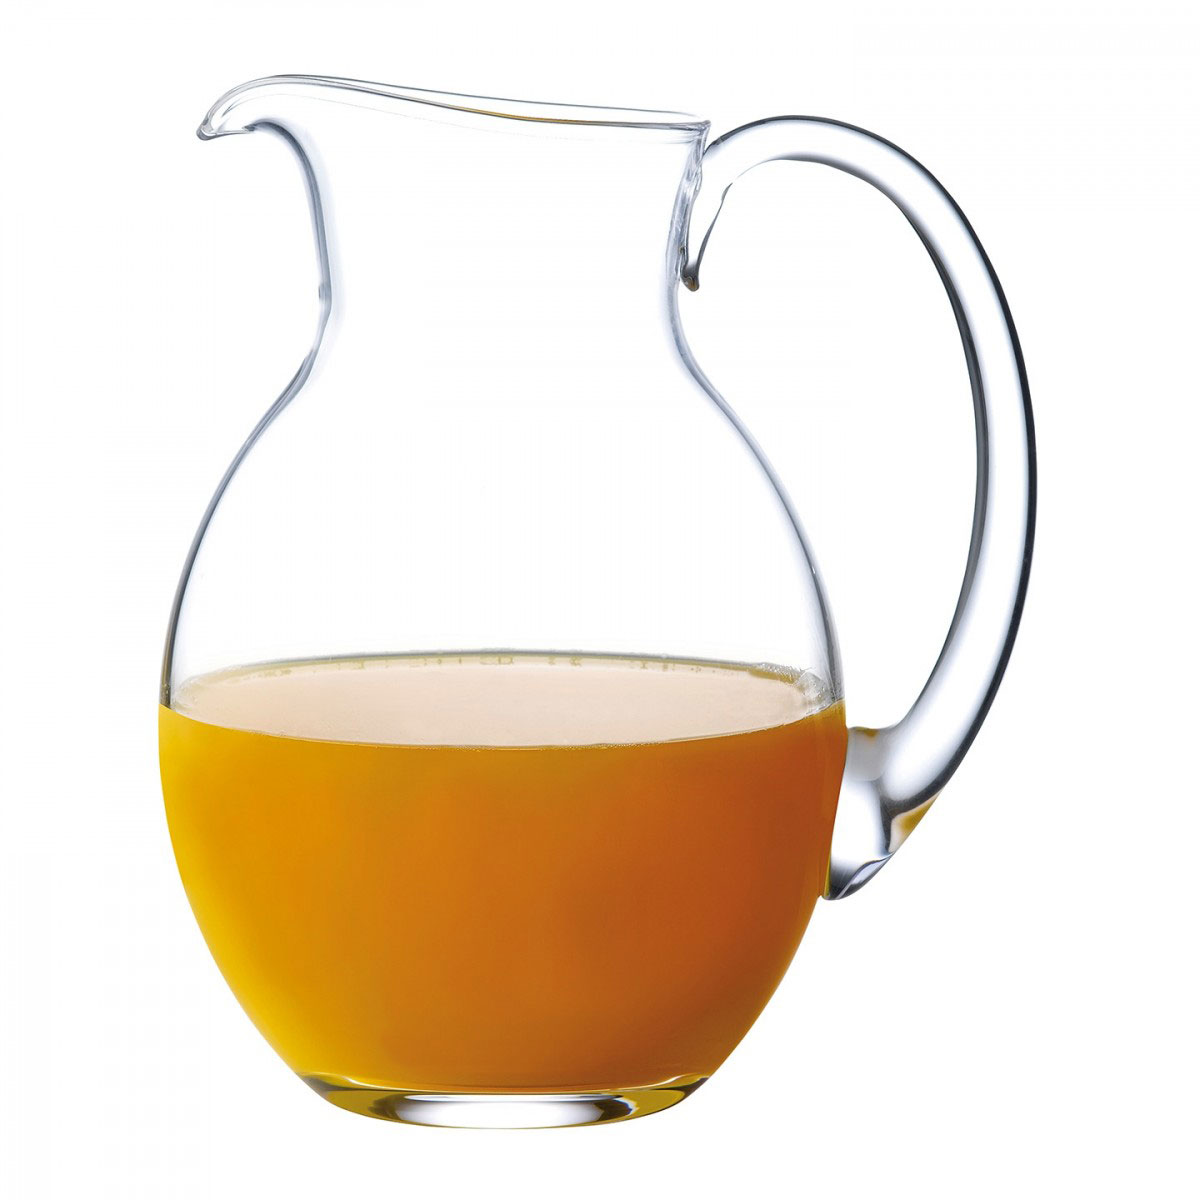 Marquis by Waterford Moments Round Pitcher